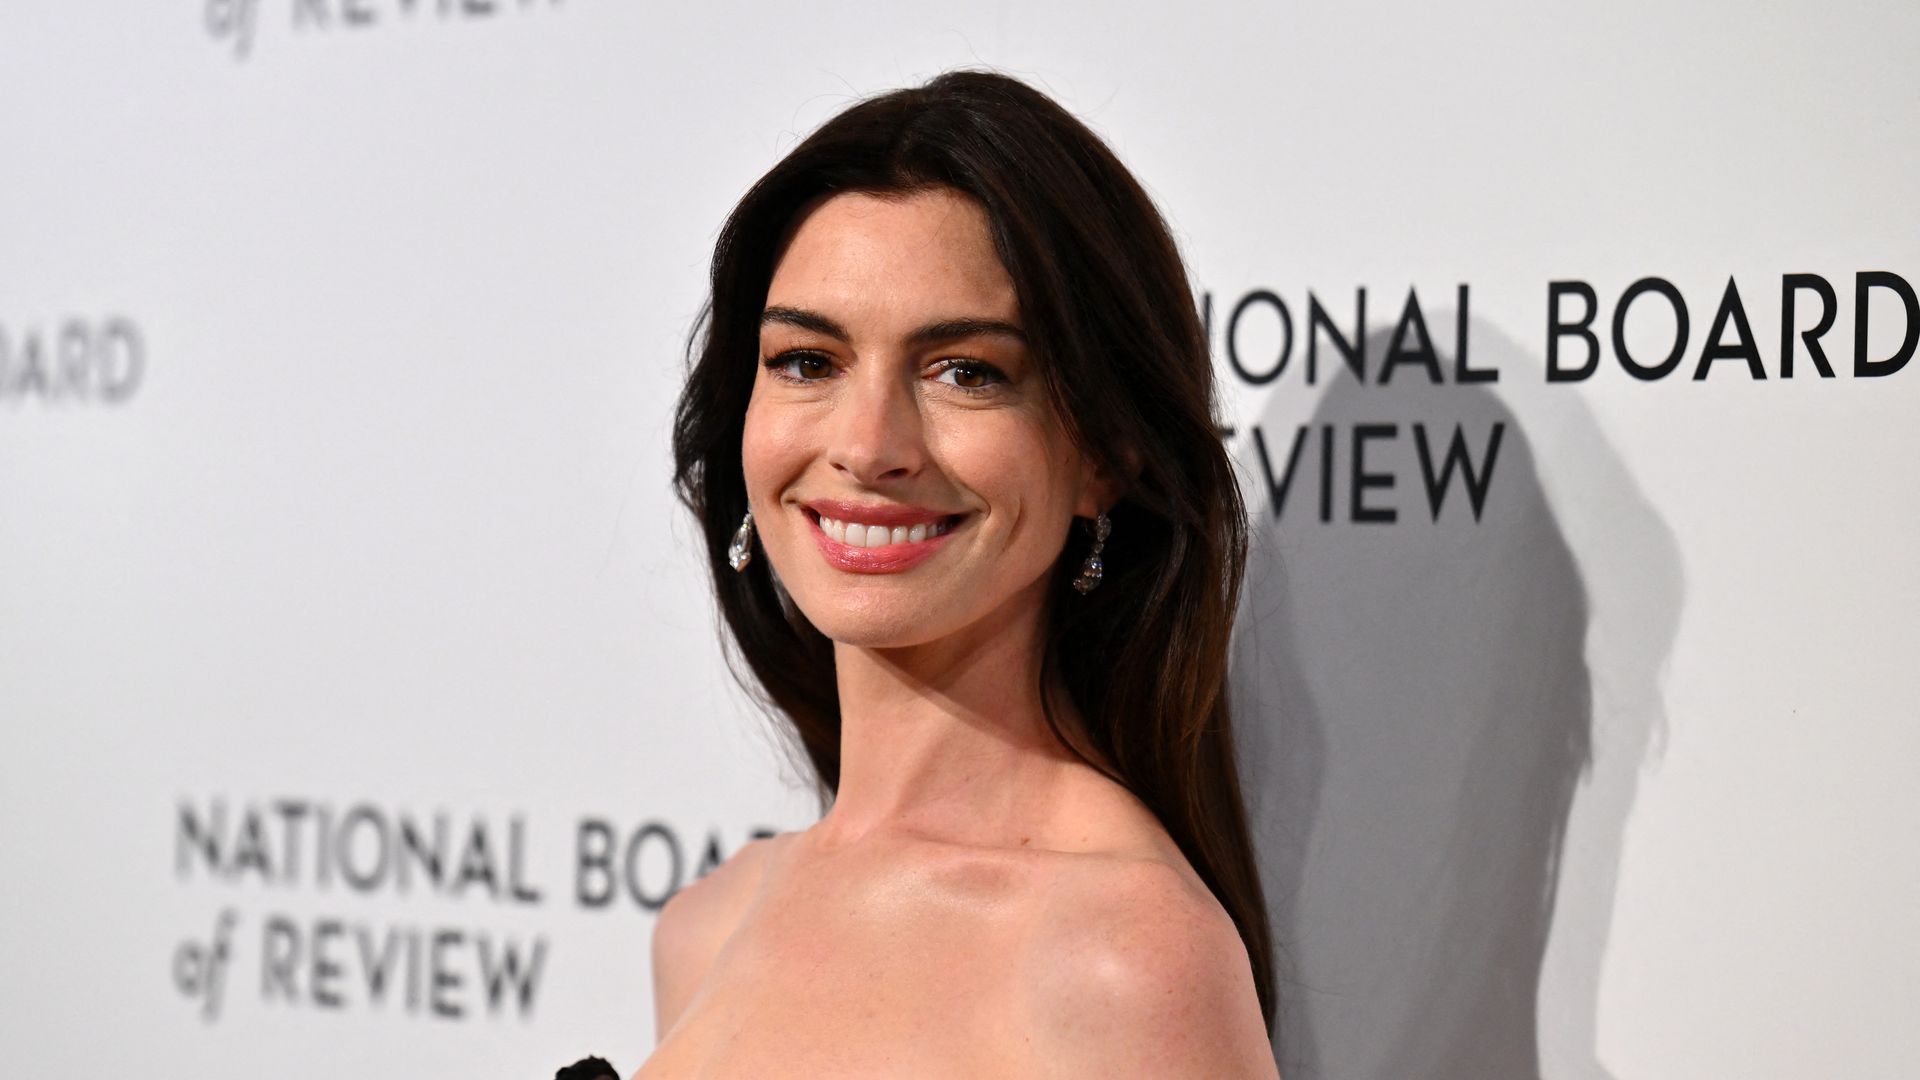 Anne Hathaway attends the National Board of Review annual awards gala in a black plunging neckline gown